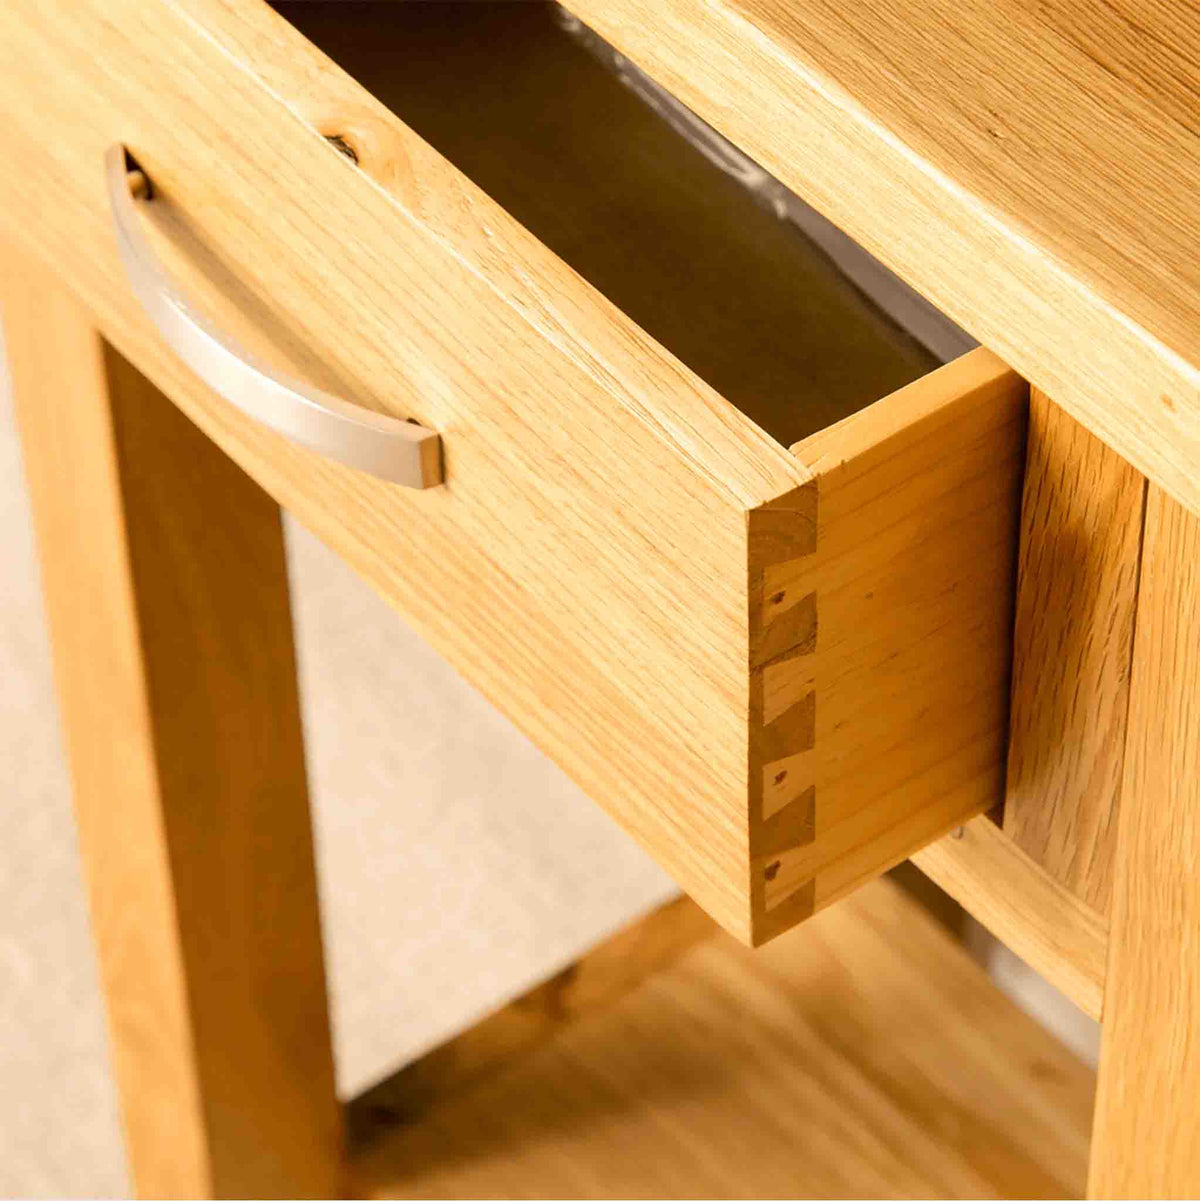 Dovetail joints on the London Oak Telephone Table by Roseland Furniture